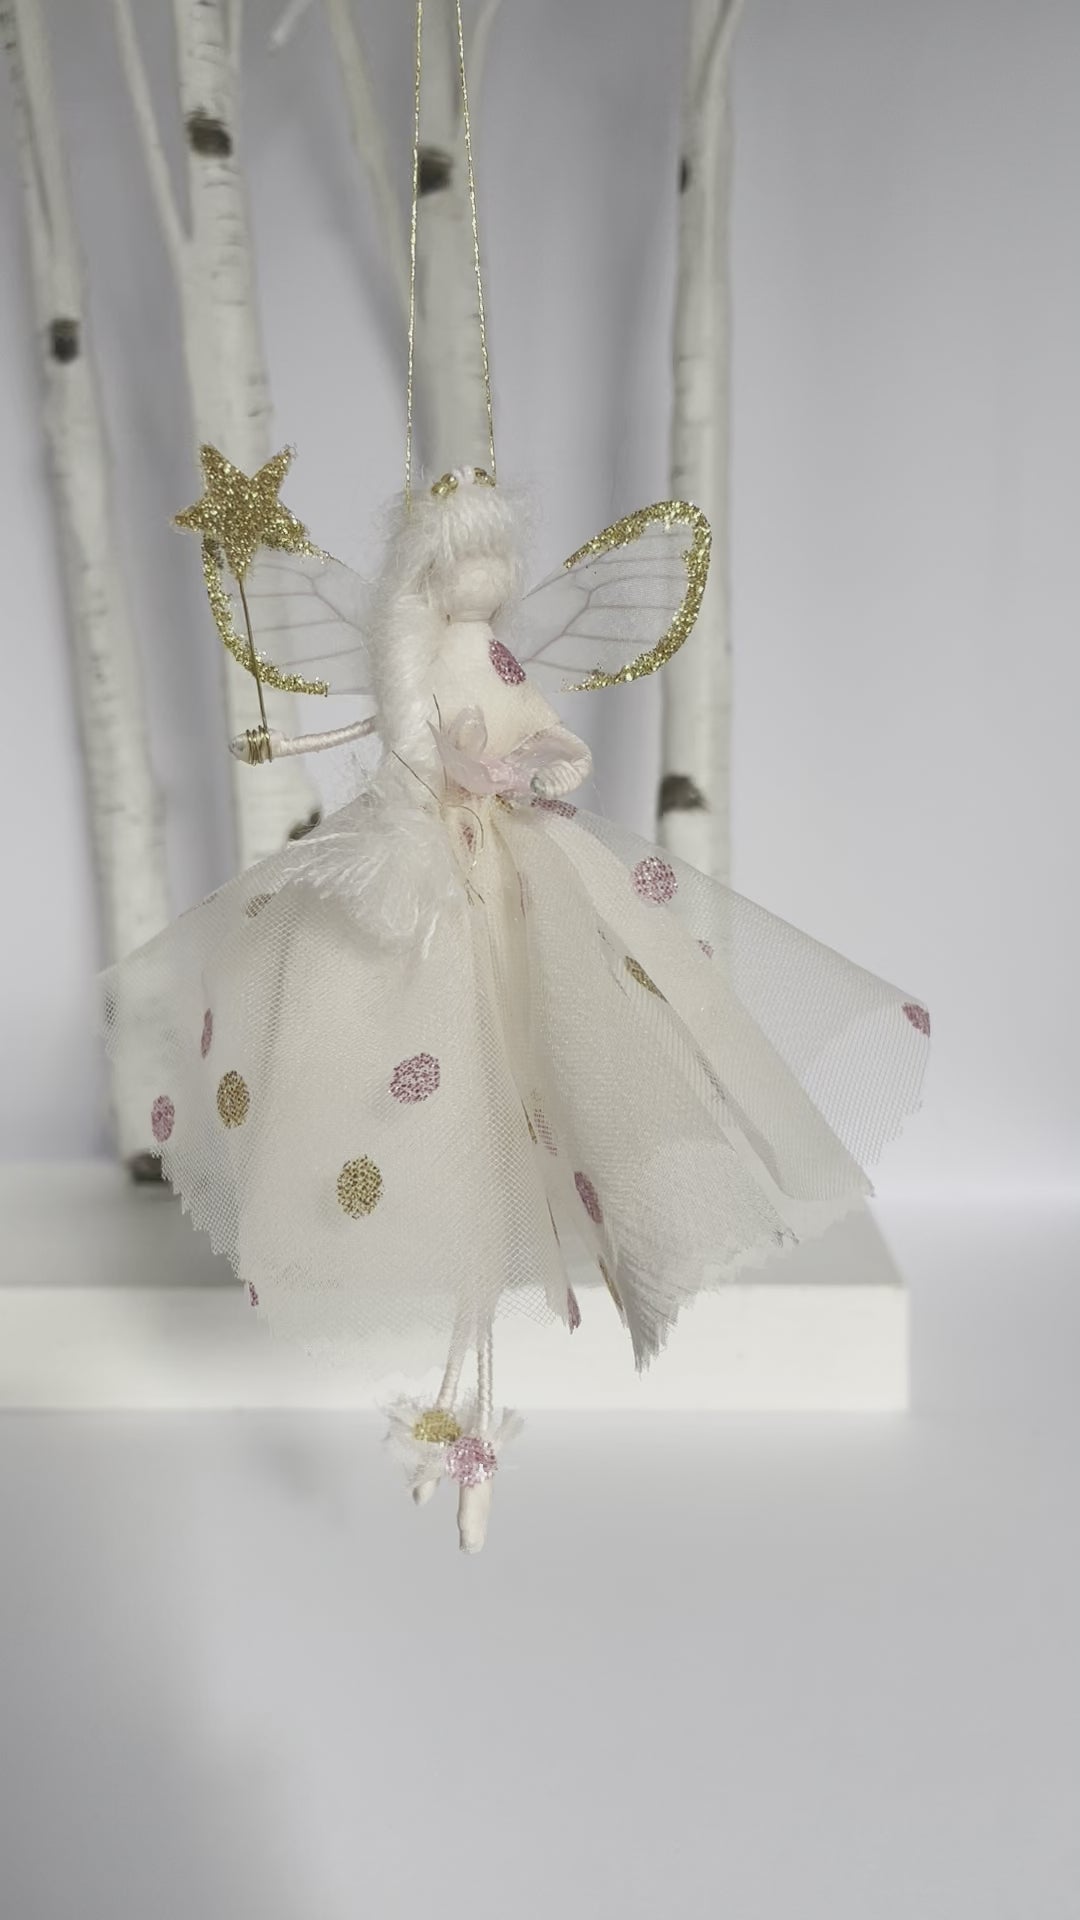 Ballerina Fairy Decoration pink tulle, gold glitter spots, magical wings. New baby girl gift, Dancer present.